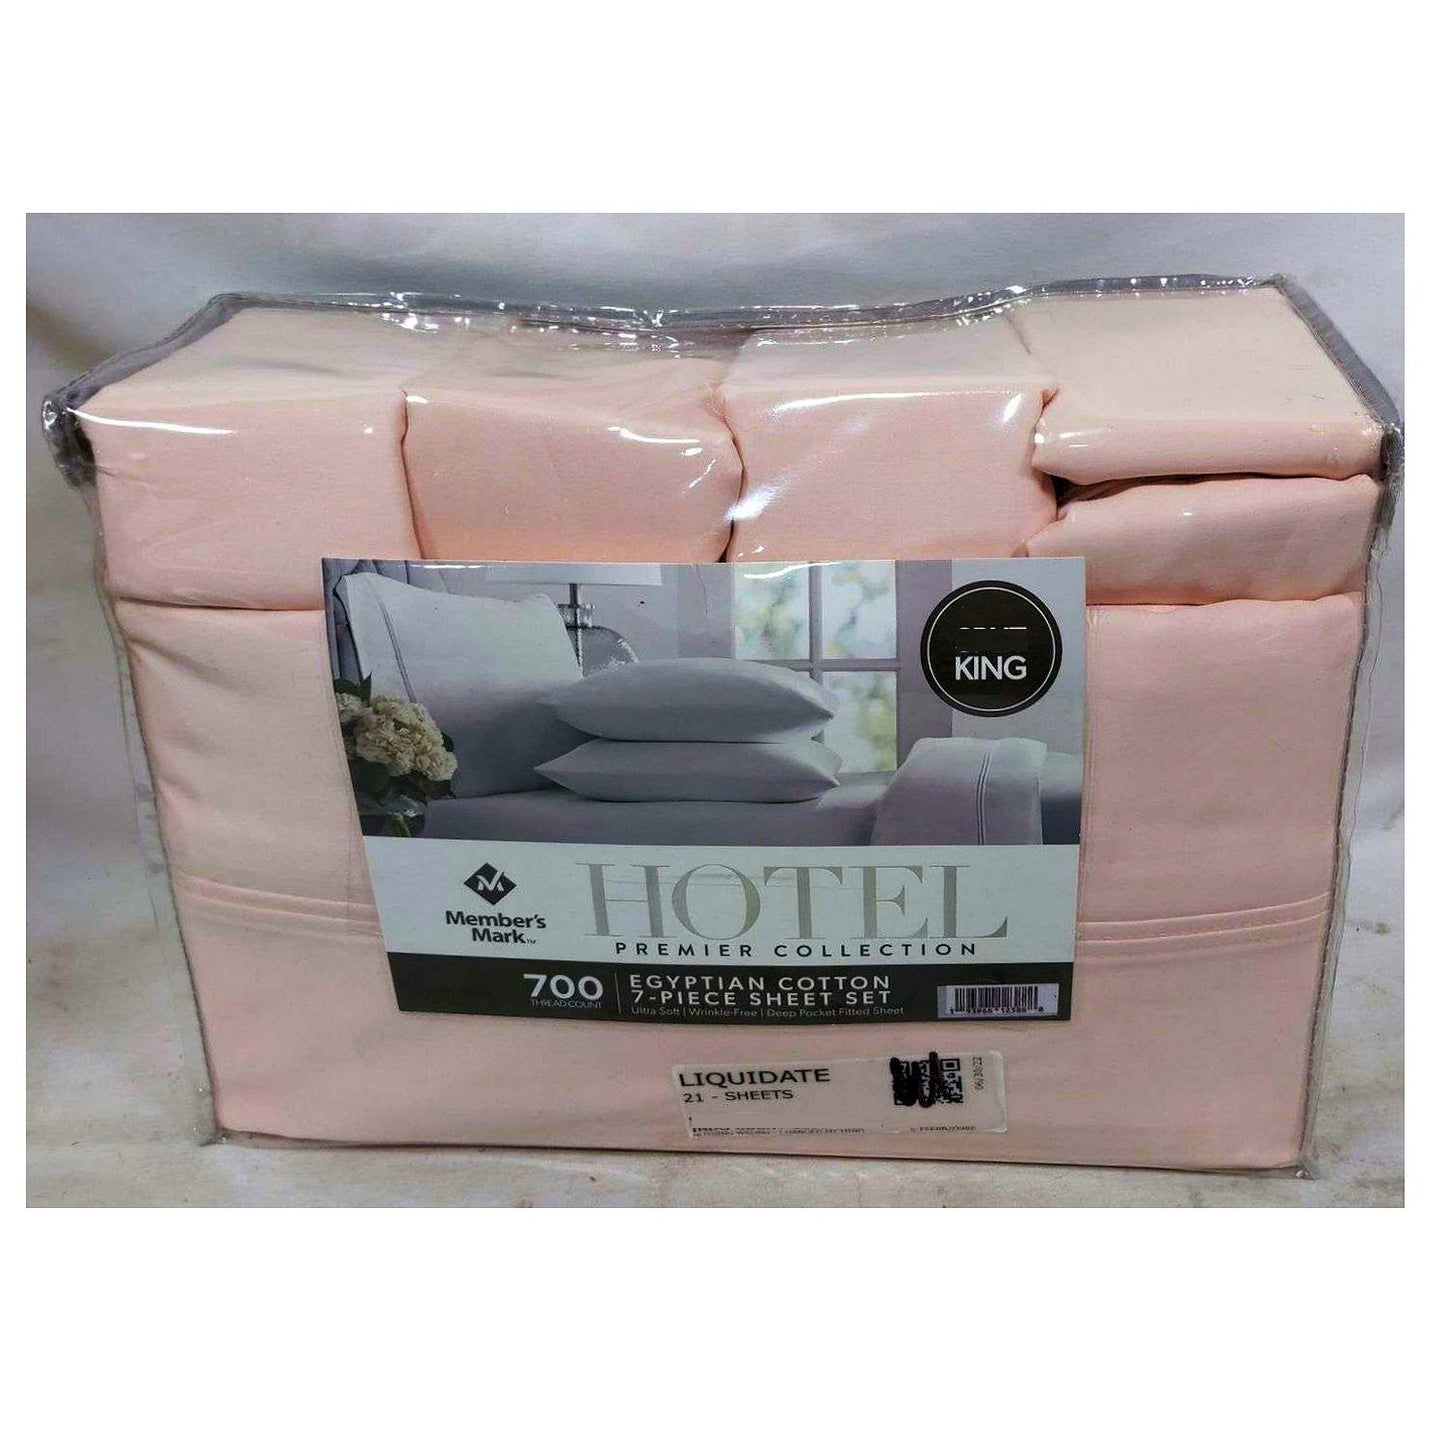 Member’s Mark Hotel Premier Collection 700 Thread Count Egyptian Cotton Sheet Set King Rose Water Pink